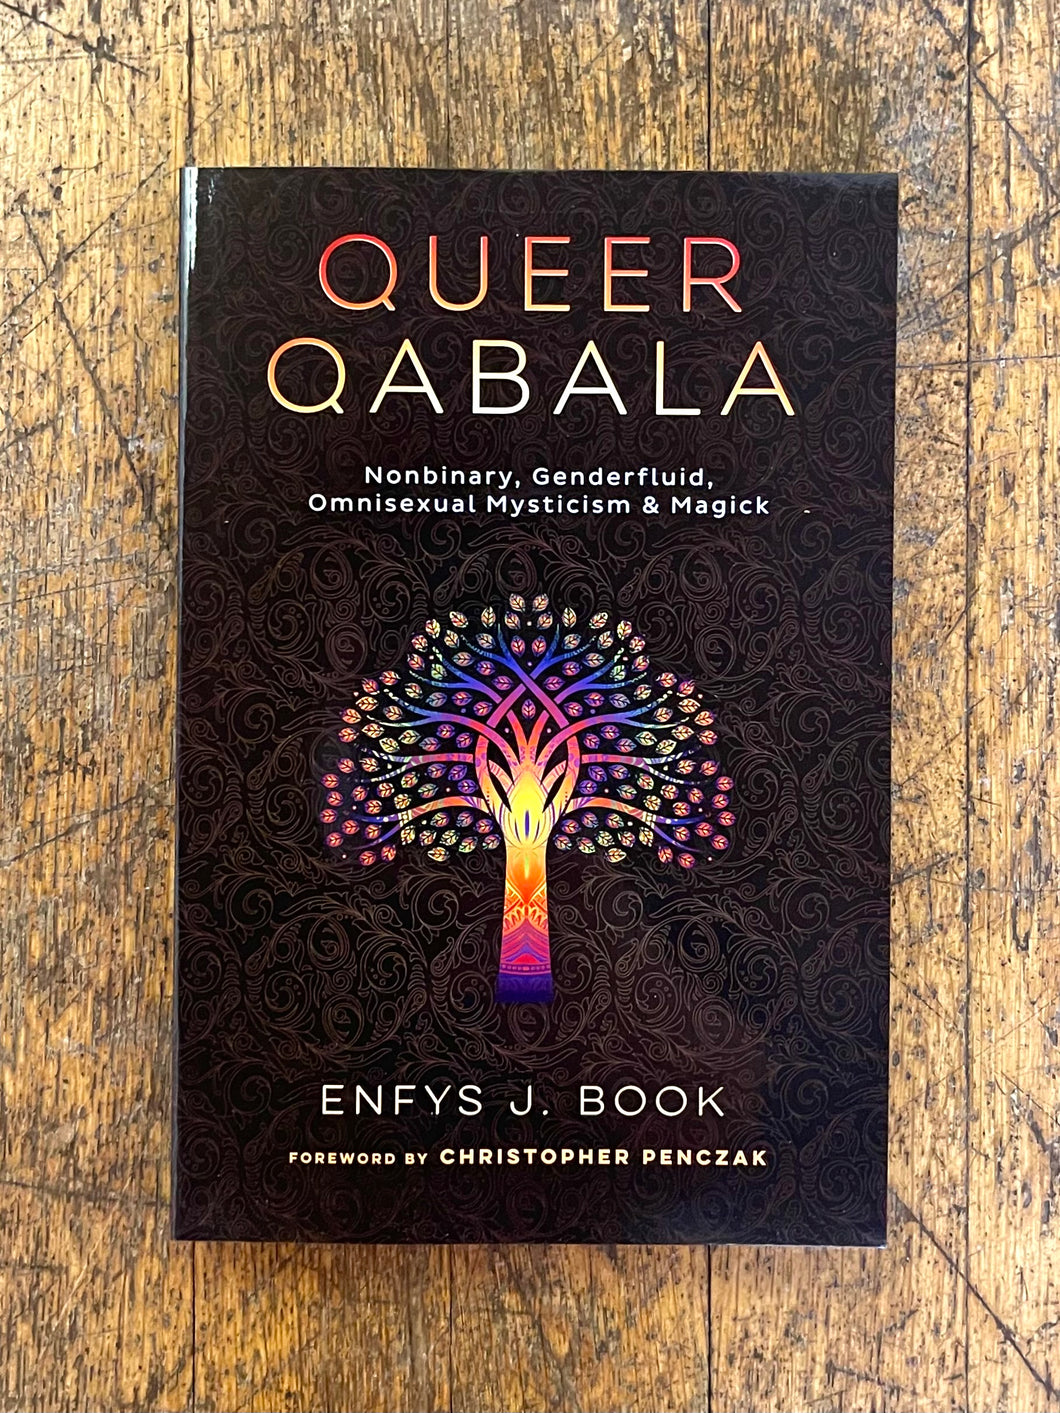 Queer Qabala by Enfys J. Book